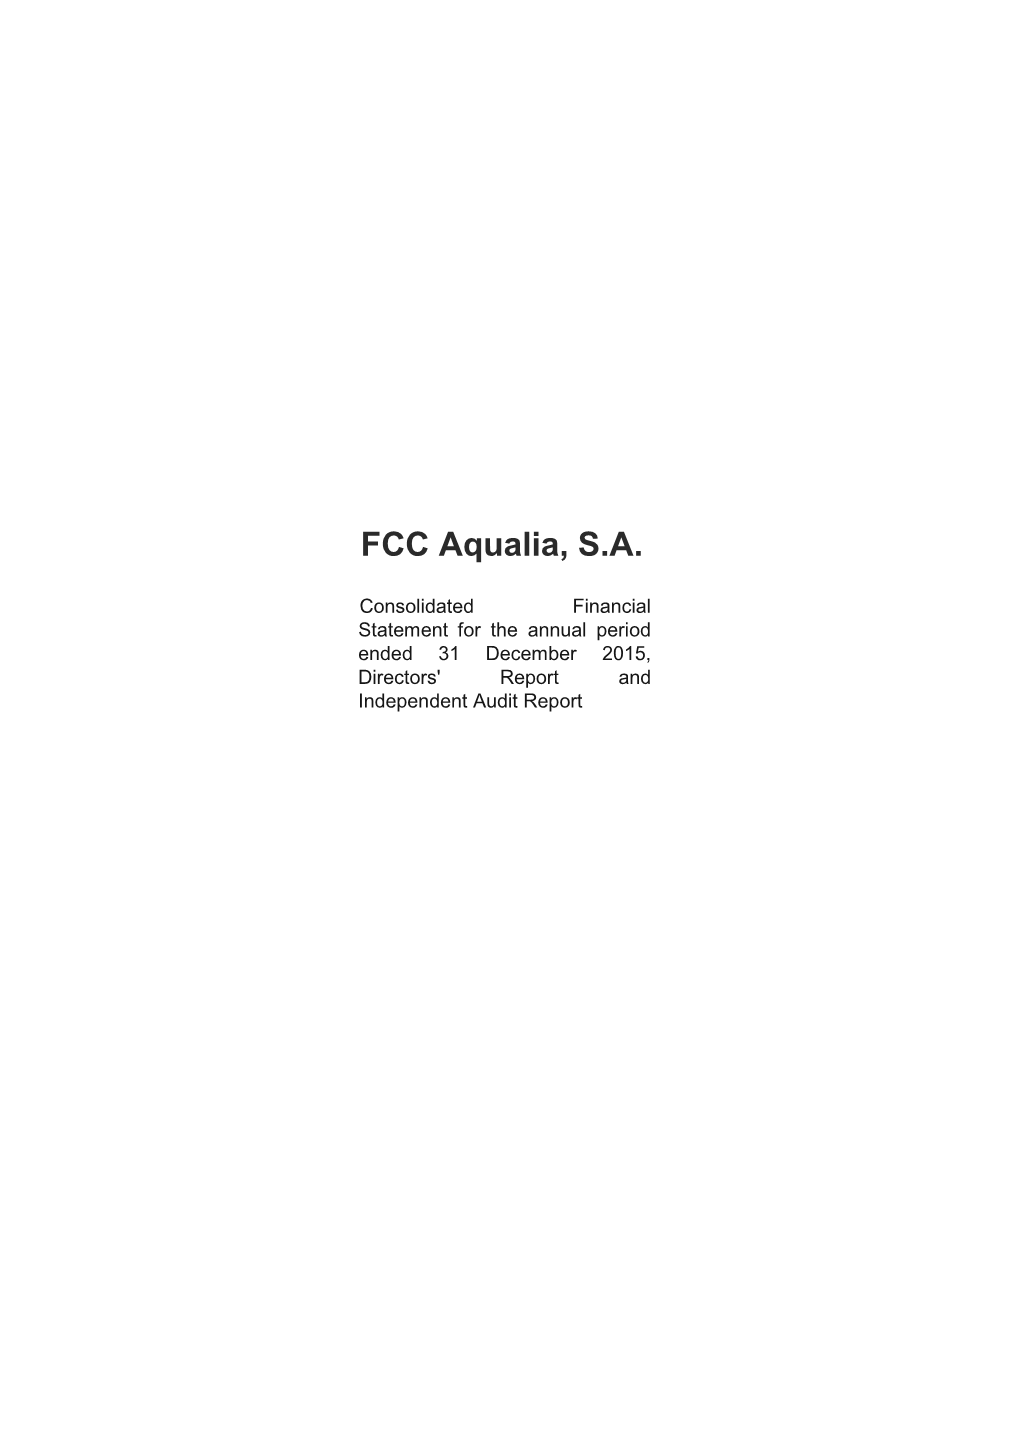 Group FCC Aqualia Audited Consolidated Financial Statements